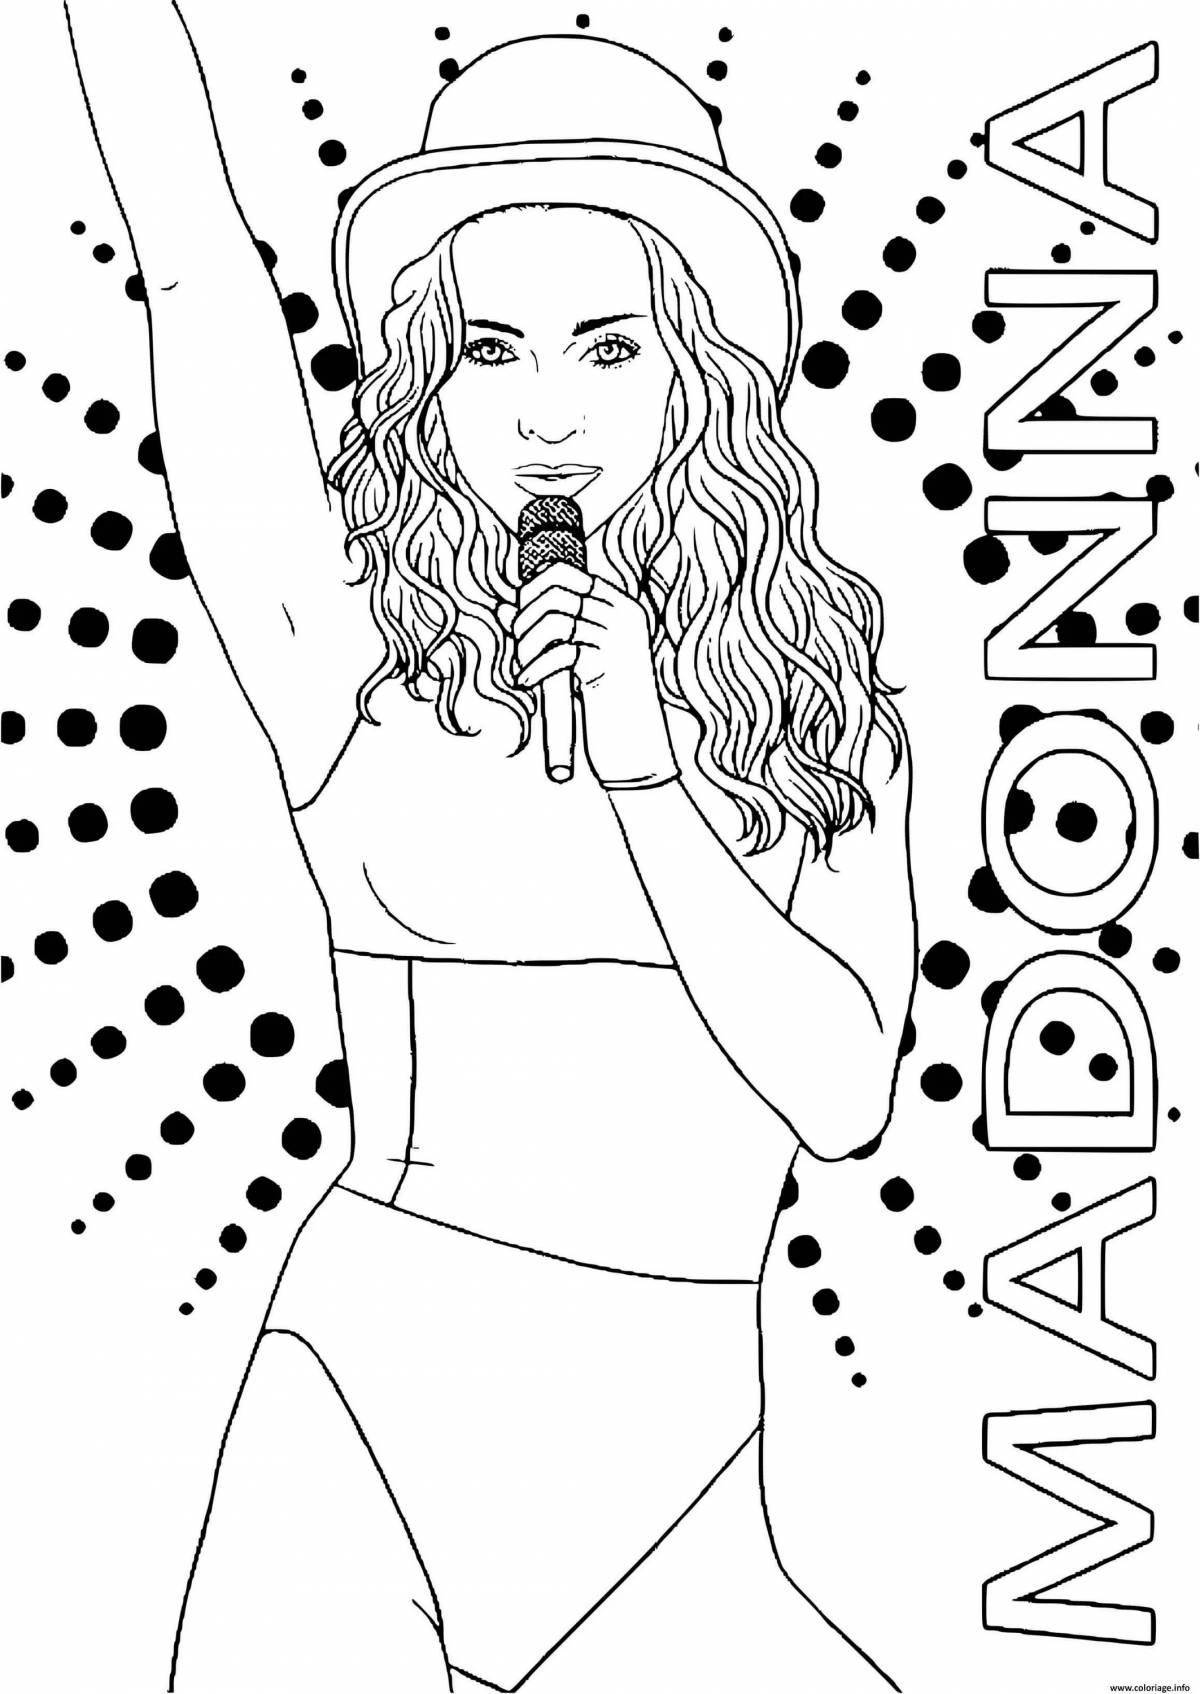 Charming singer coloring book for kids